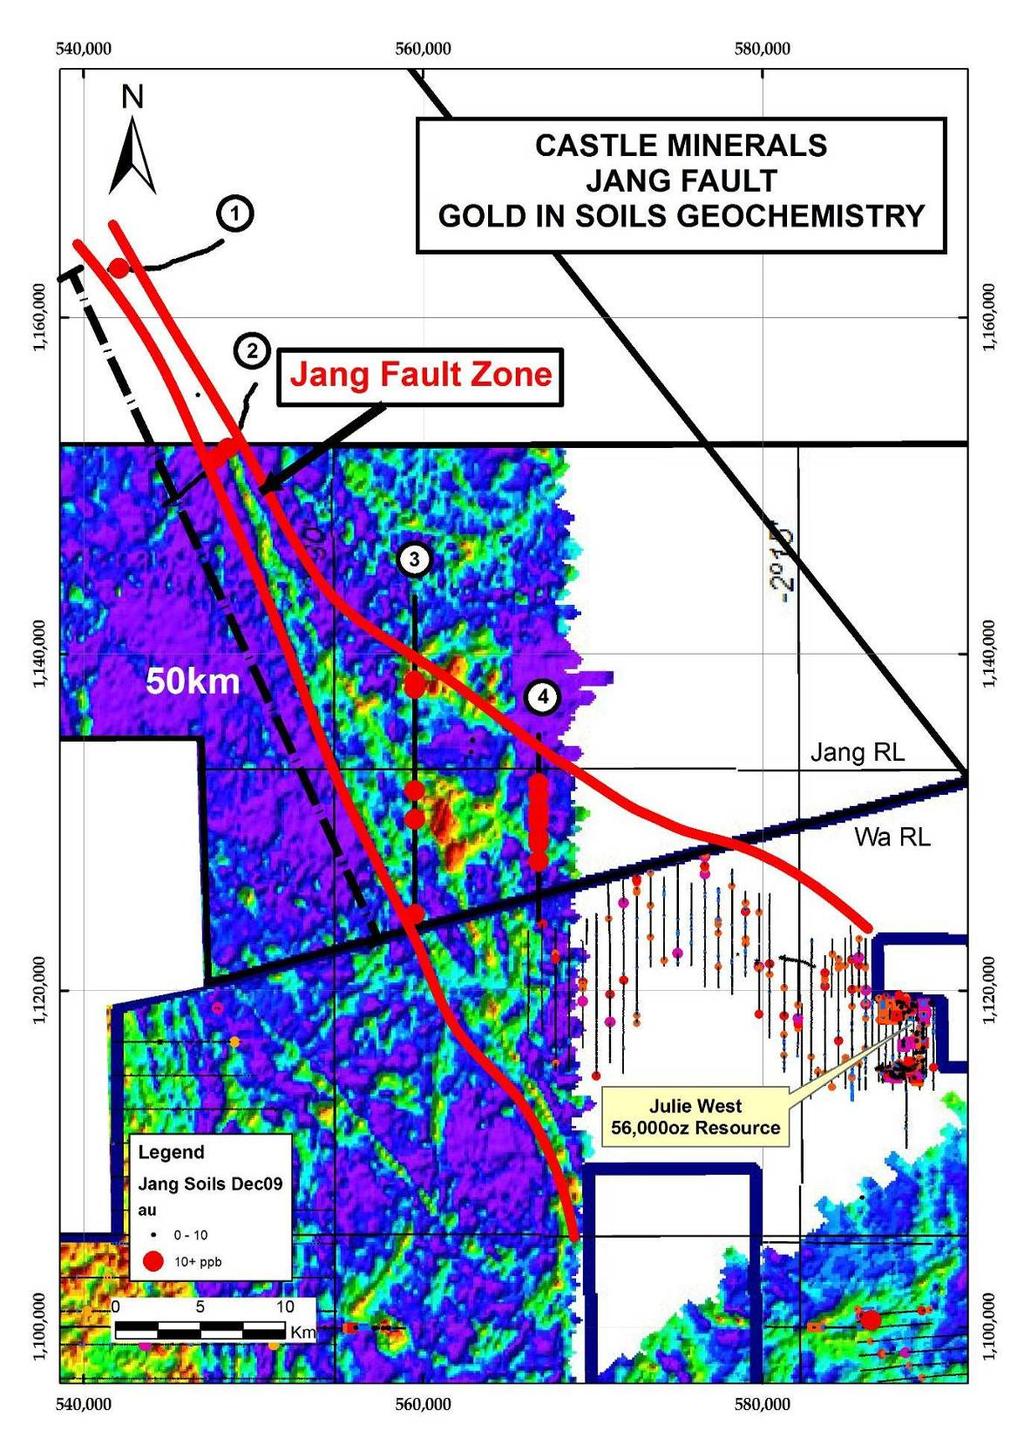 Julie West Jang Trend The Julie West - Jang Trend is interpreted to extend at least 30km to the northwest from the Julie West deposit.